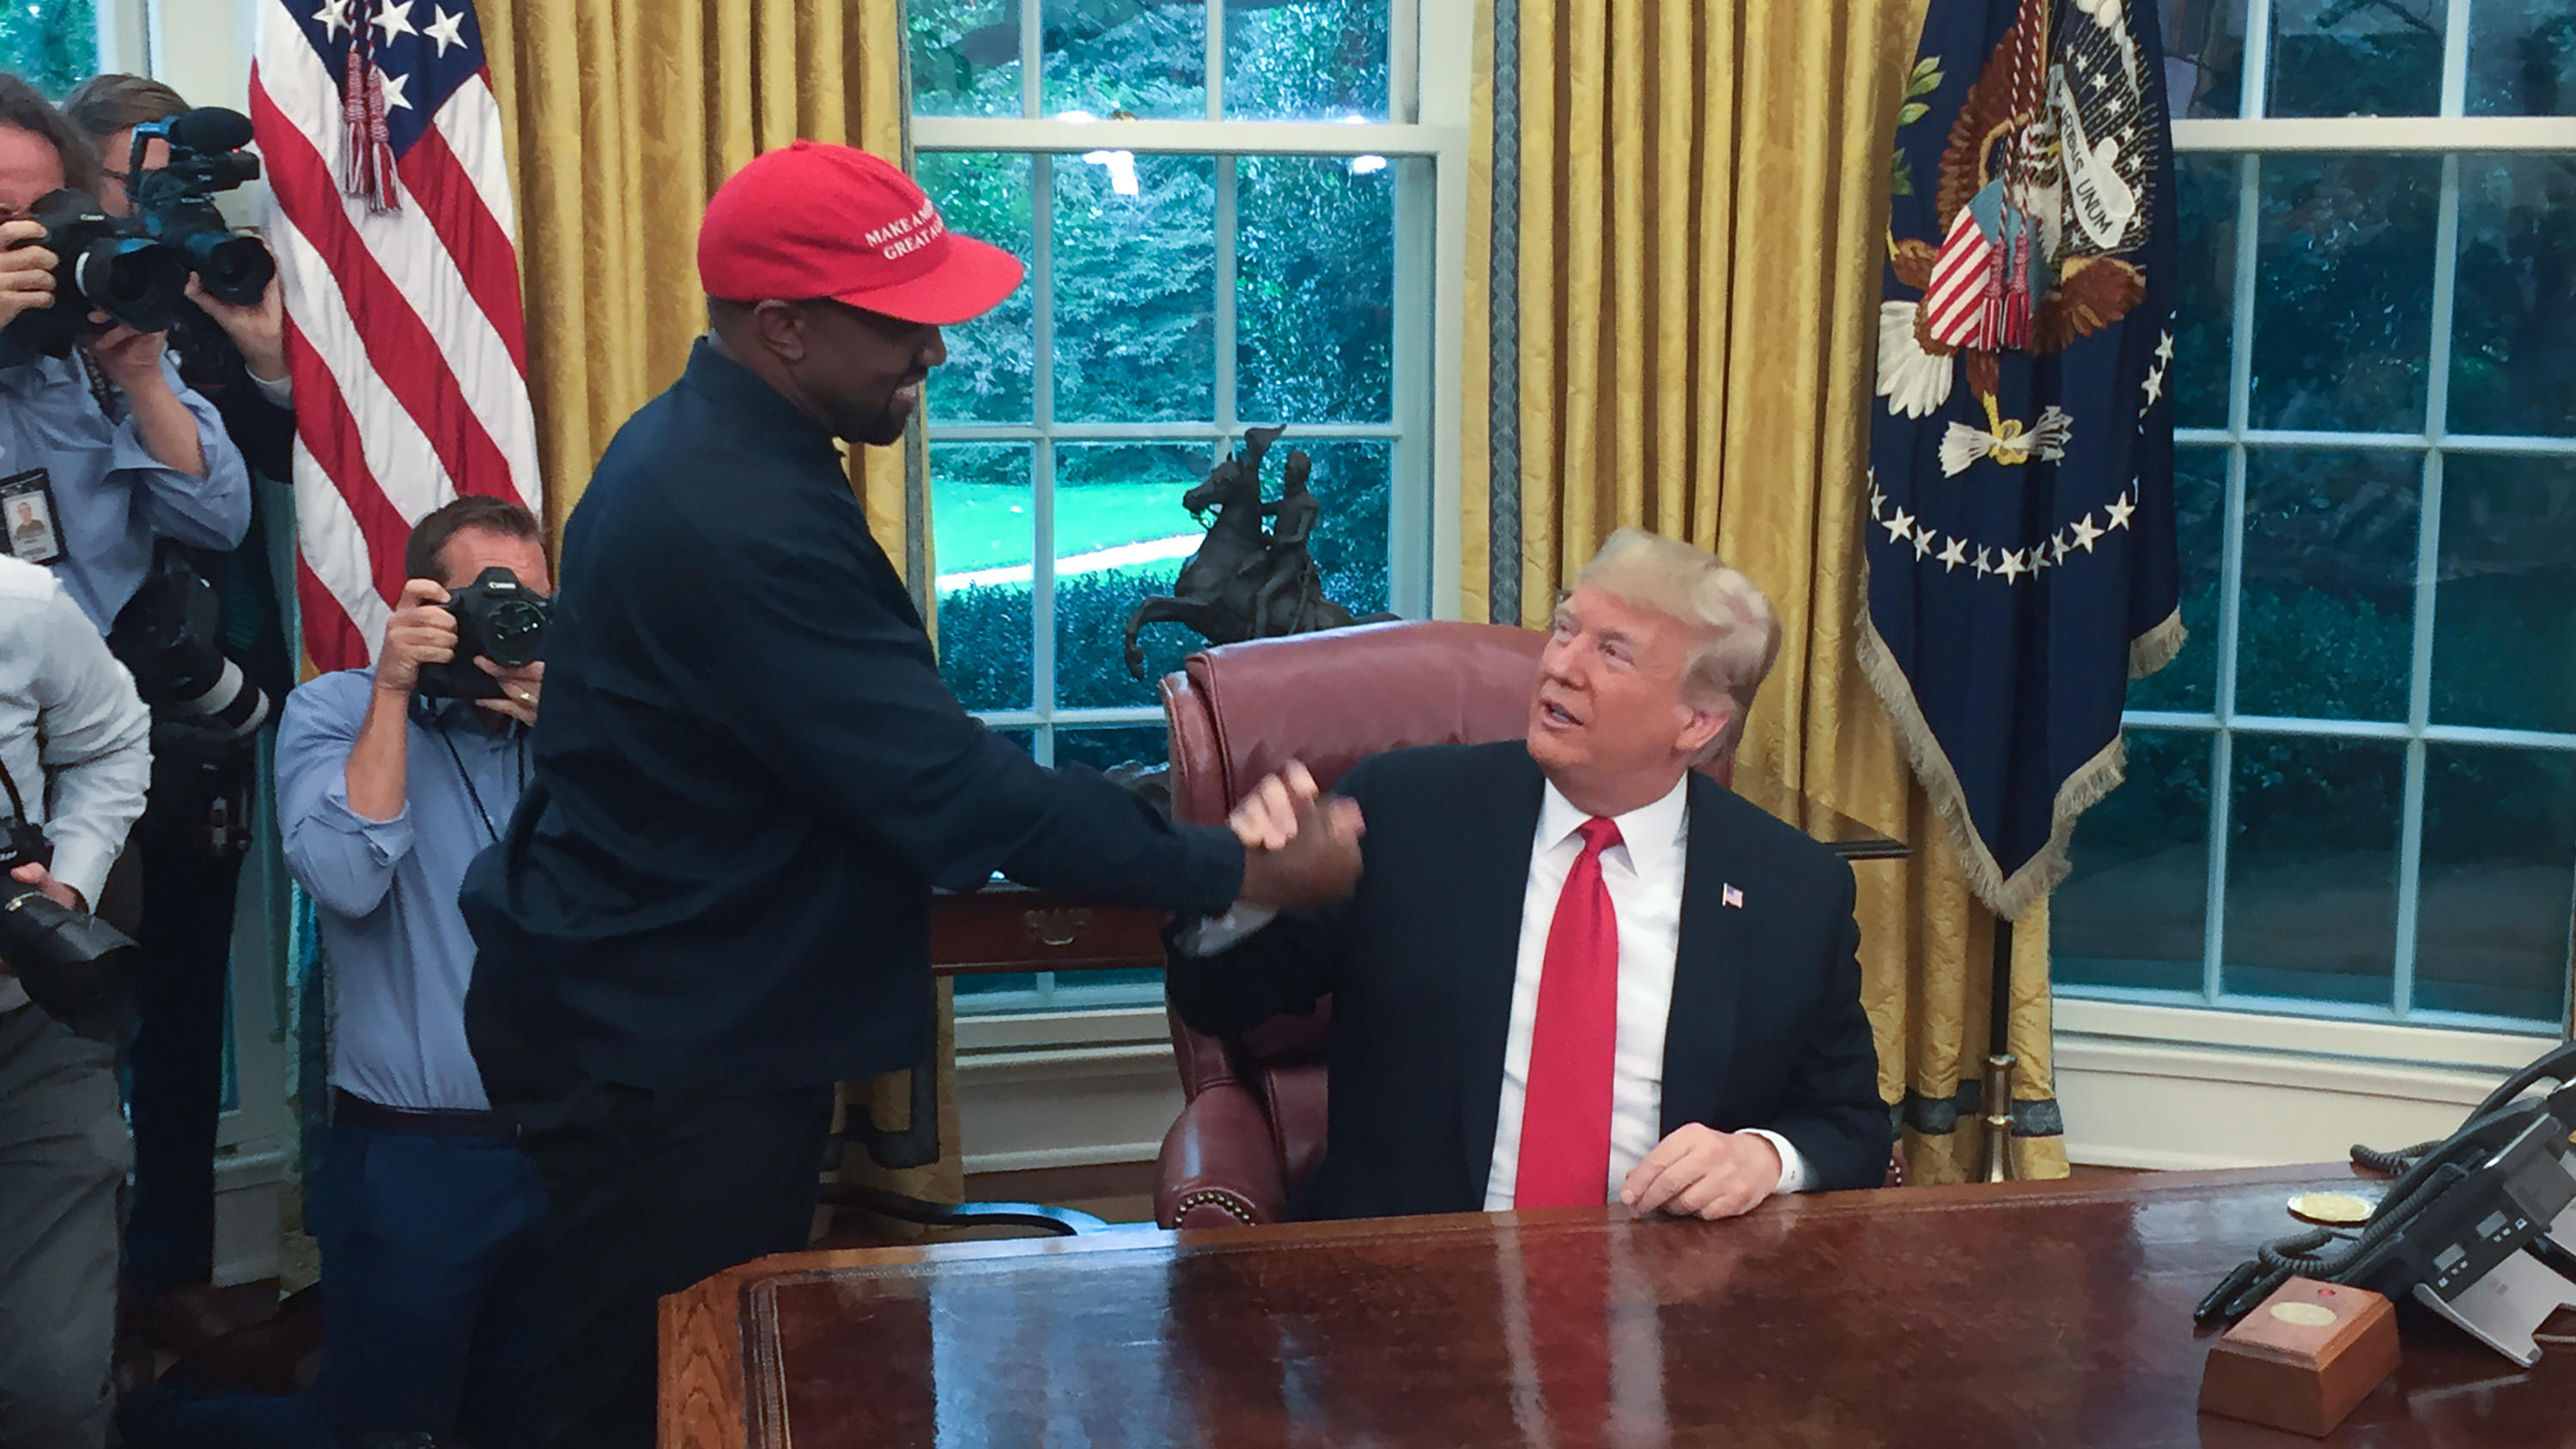 (Files) in this file photo US President Donald Trump meets with rapper Kanye West in the Oval Office of the White House in Washington, DC, October 11, 2018. - Rapper Kanye West, who has been outspoken in his support for President Donald Trump, now sa